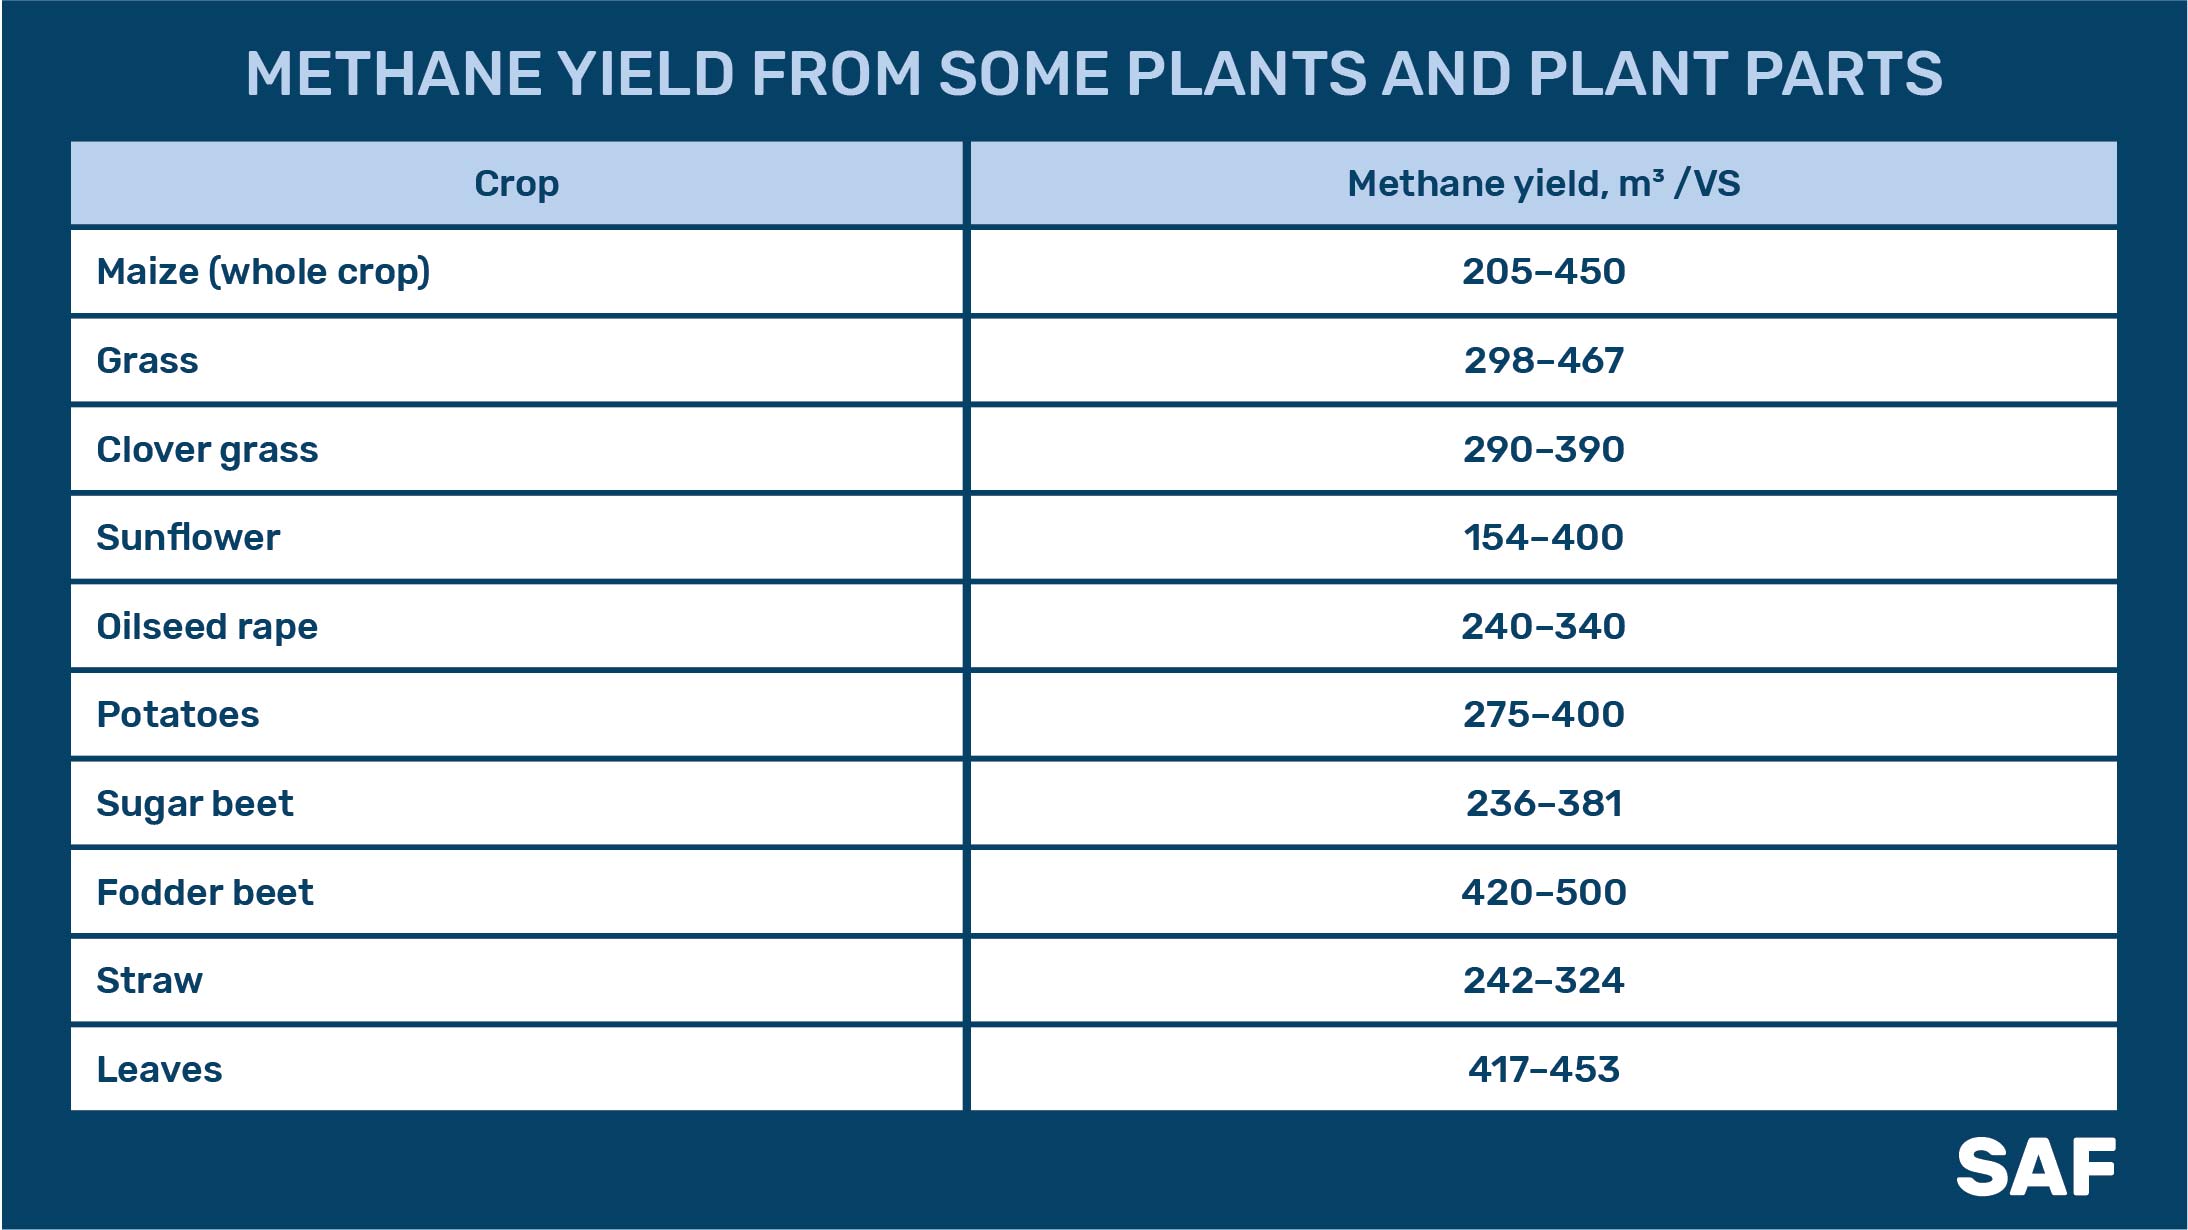 The yield of methane from various plant substrates